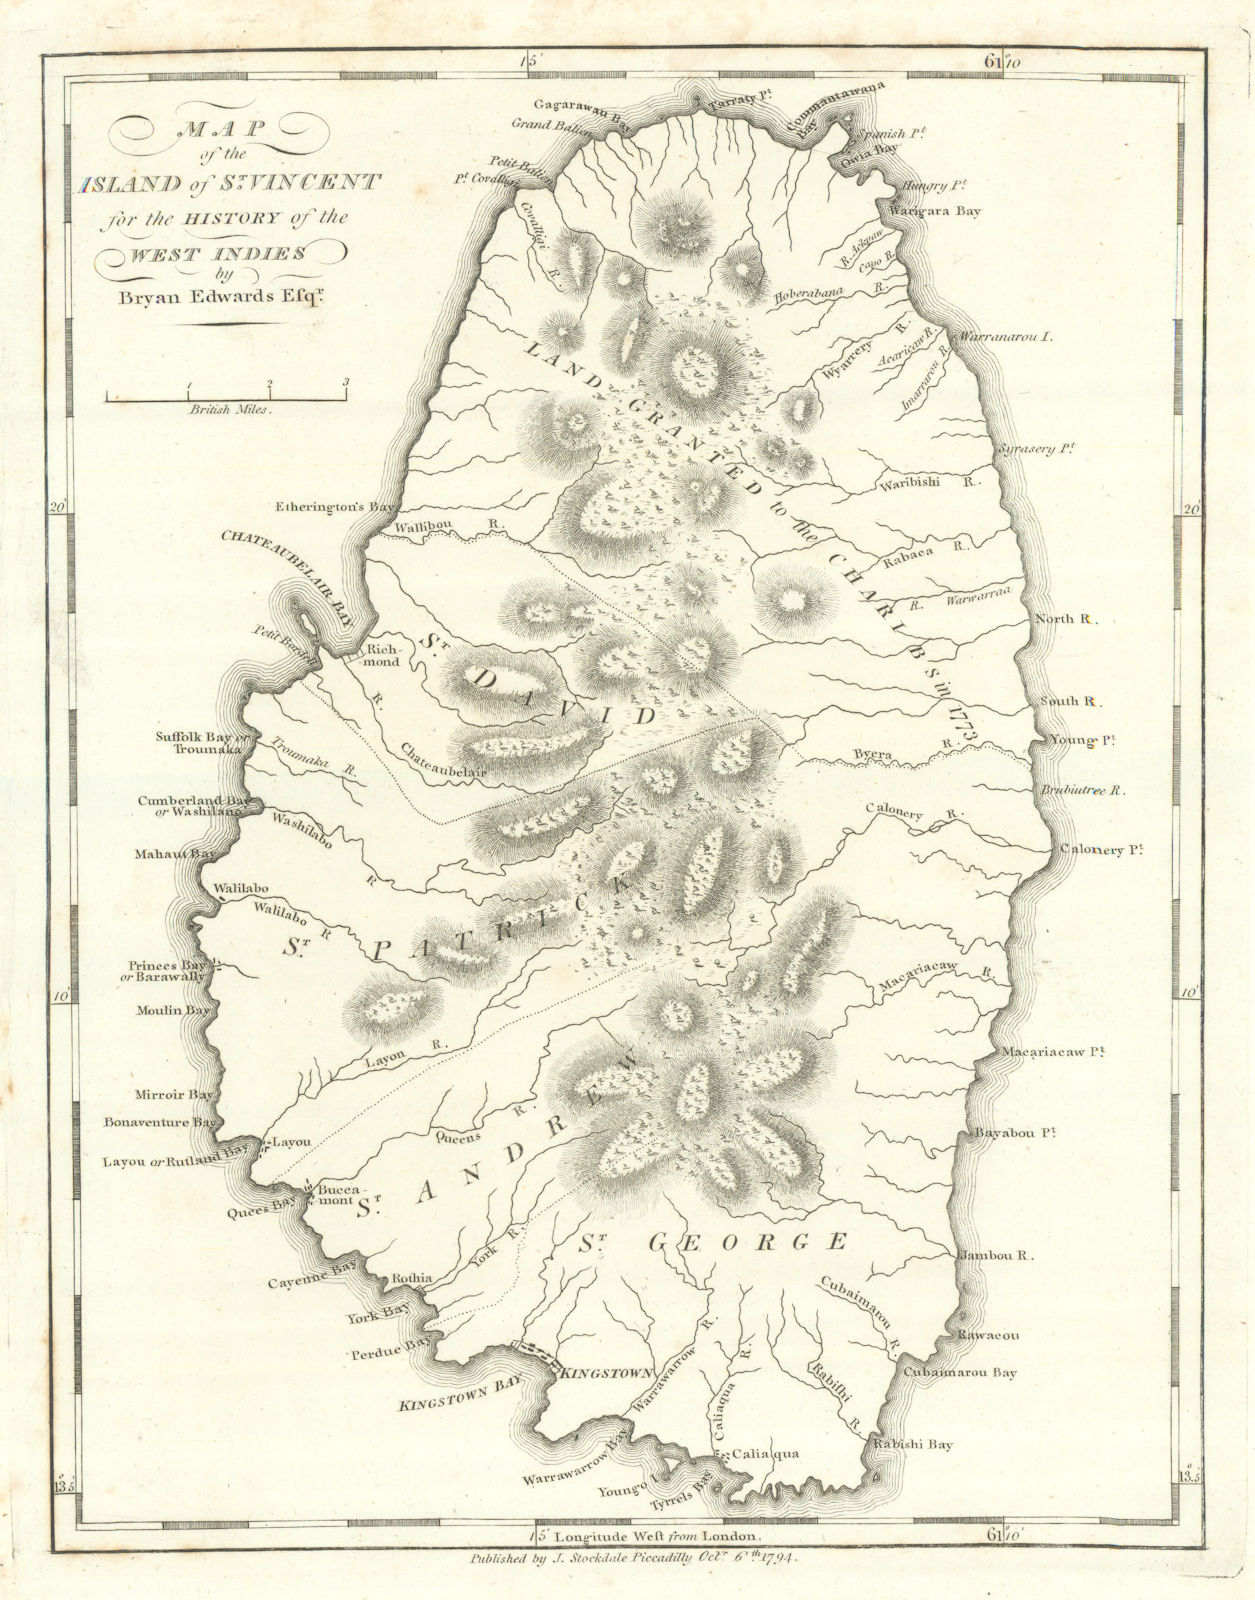 'Map of the Island of ST. VINCENT'. By Bryan EDWARDS. West Indies Caribbean 1794